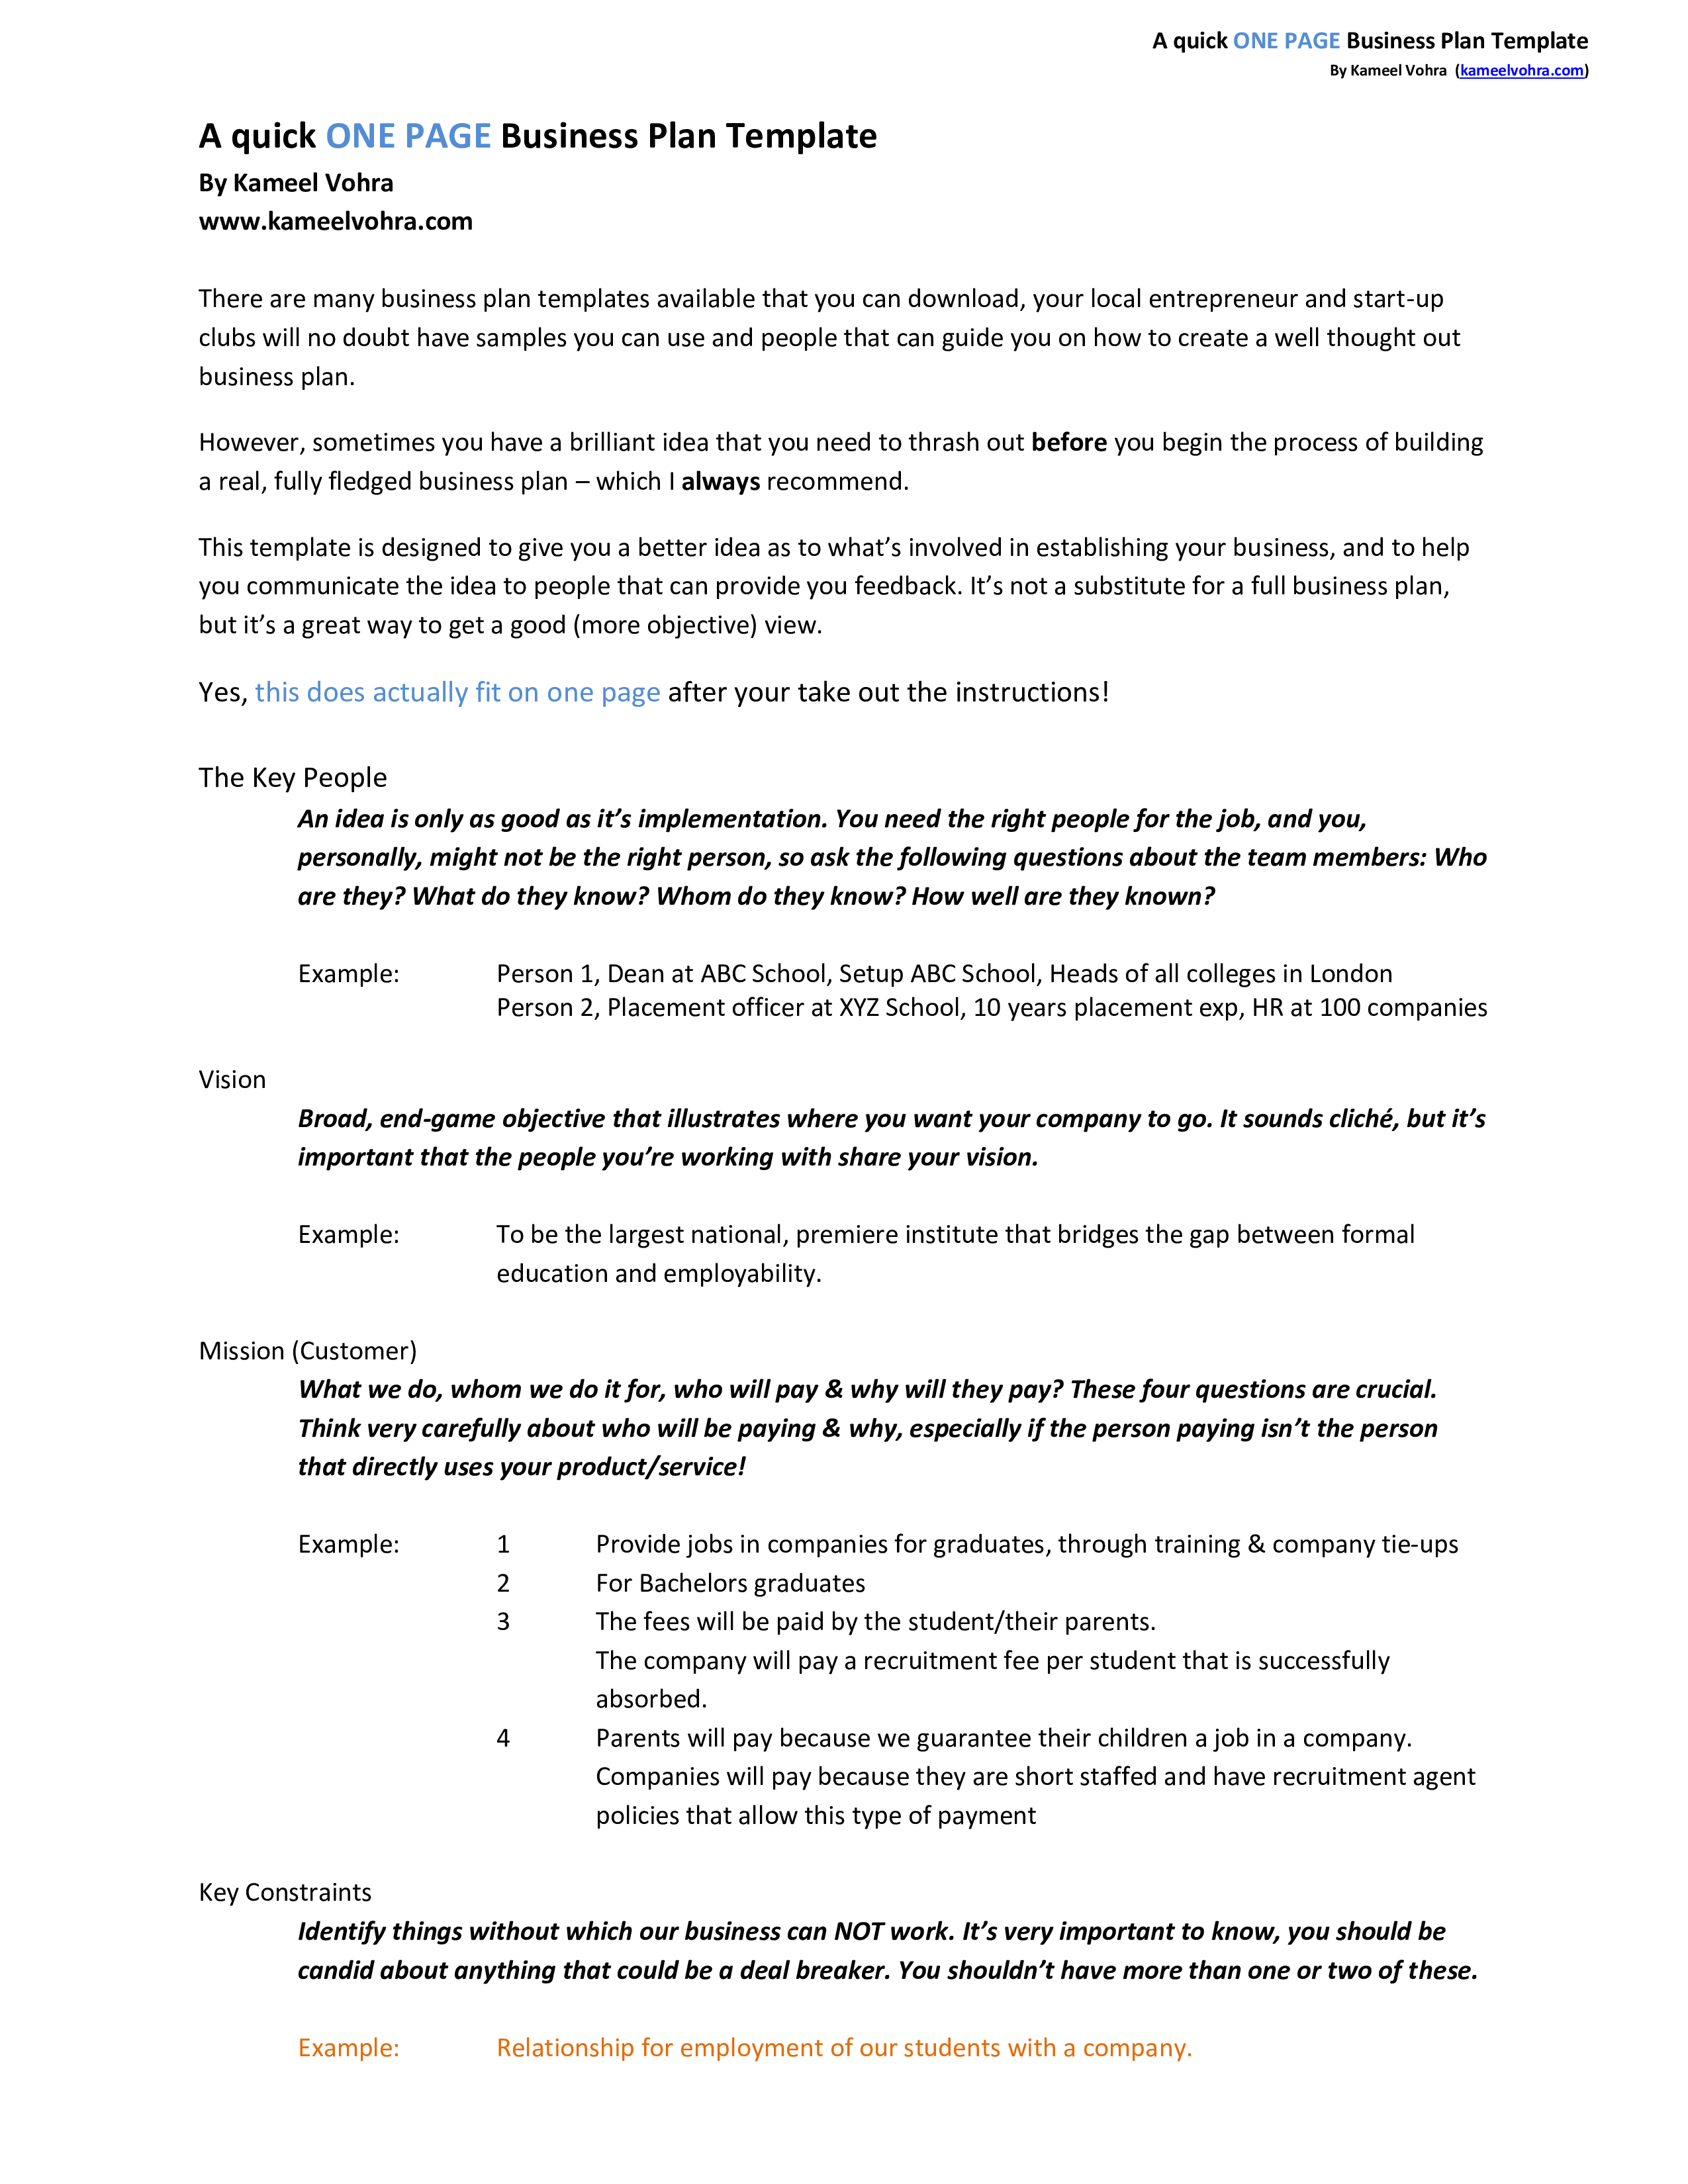 A Quick One Page Business Plan Template - Eloquens Throughout Agriculture Business Plan Template Free